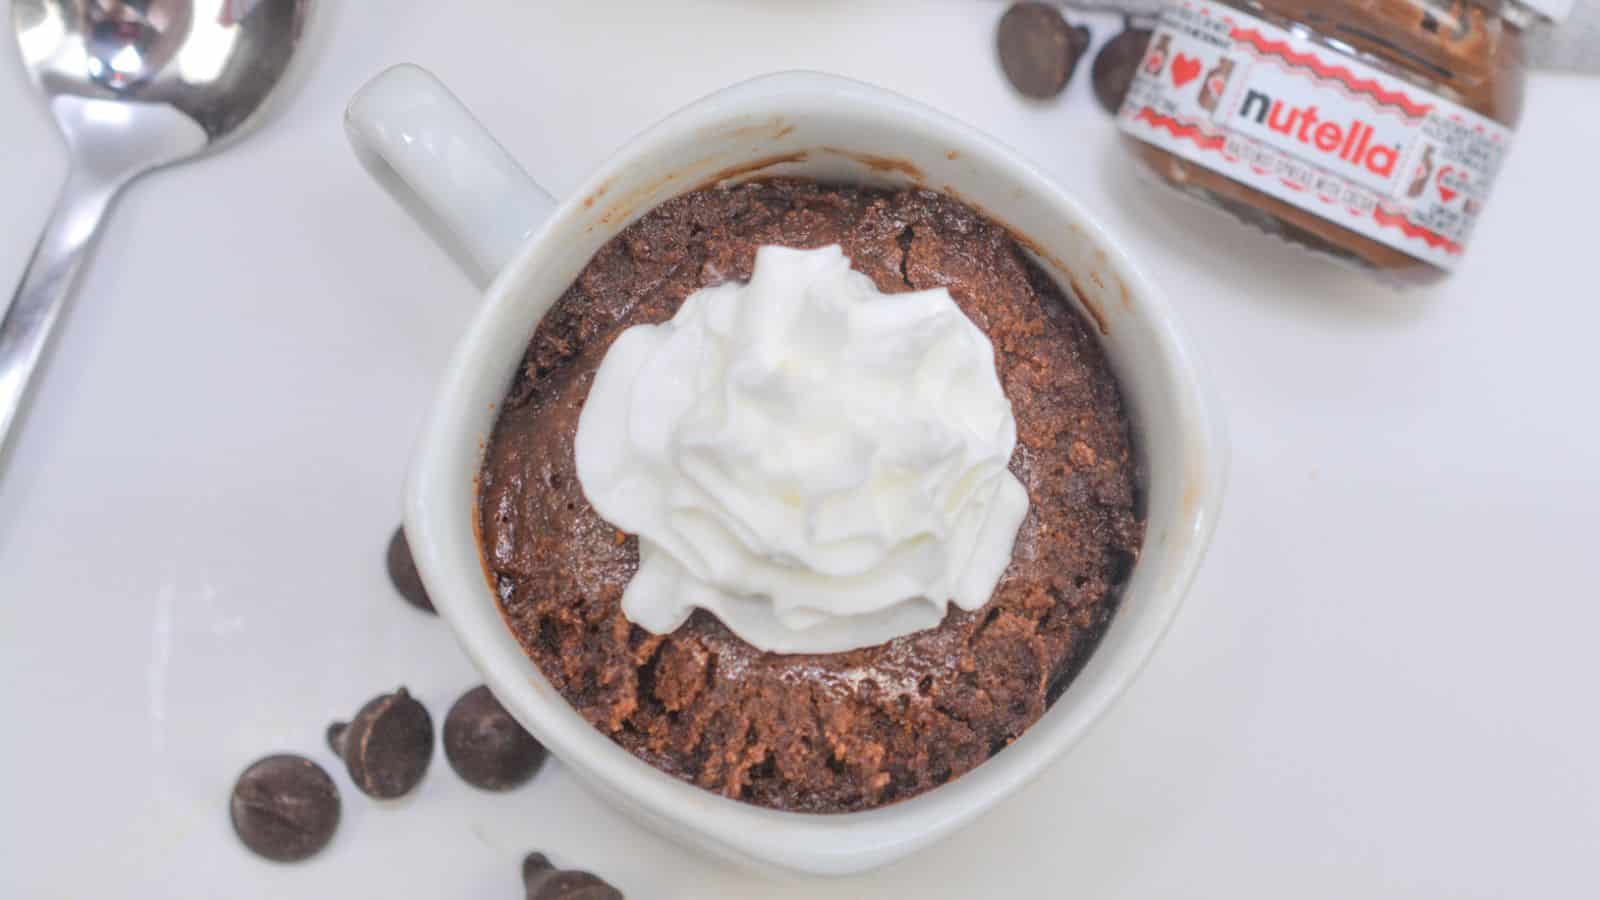 Homemade chocolate mug cake topped with whipped cream, served with a spoon and a small nutella jar on the side.